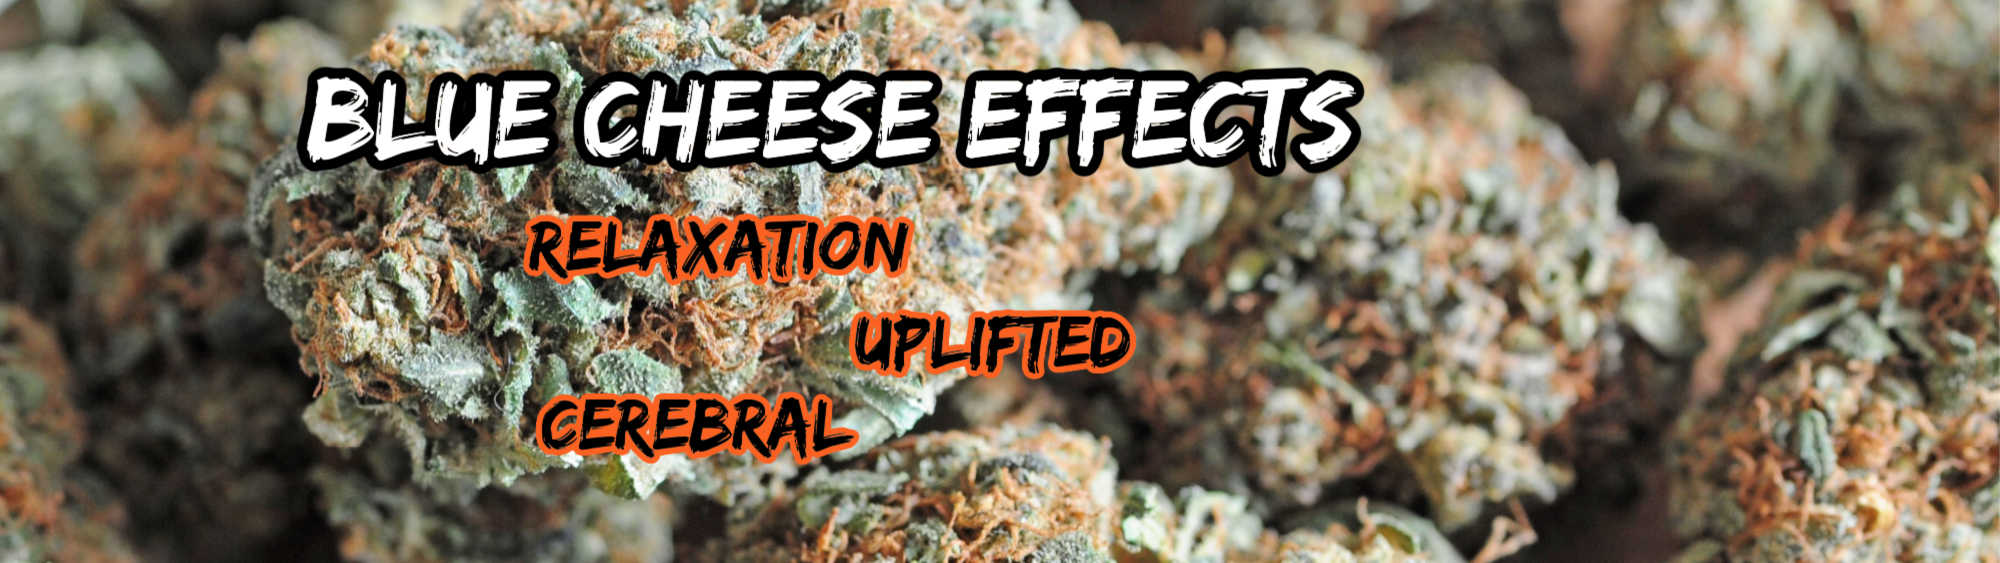 image of blue cheese effects